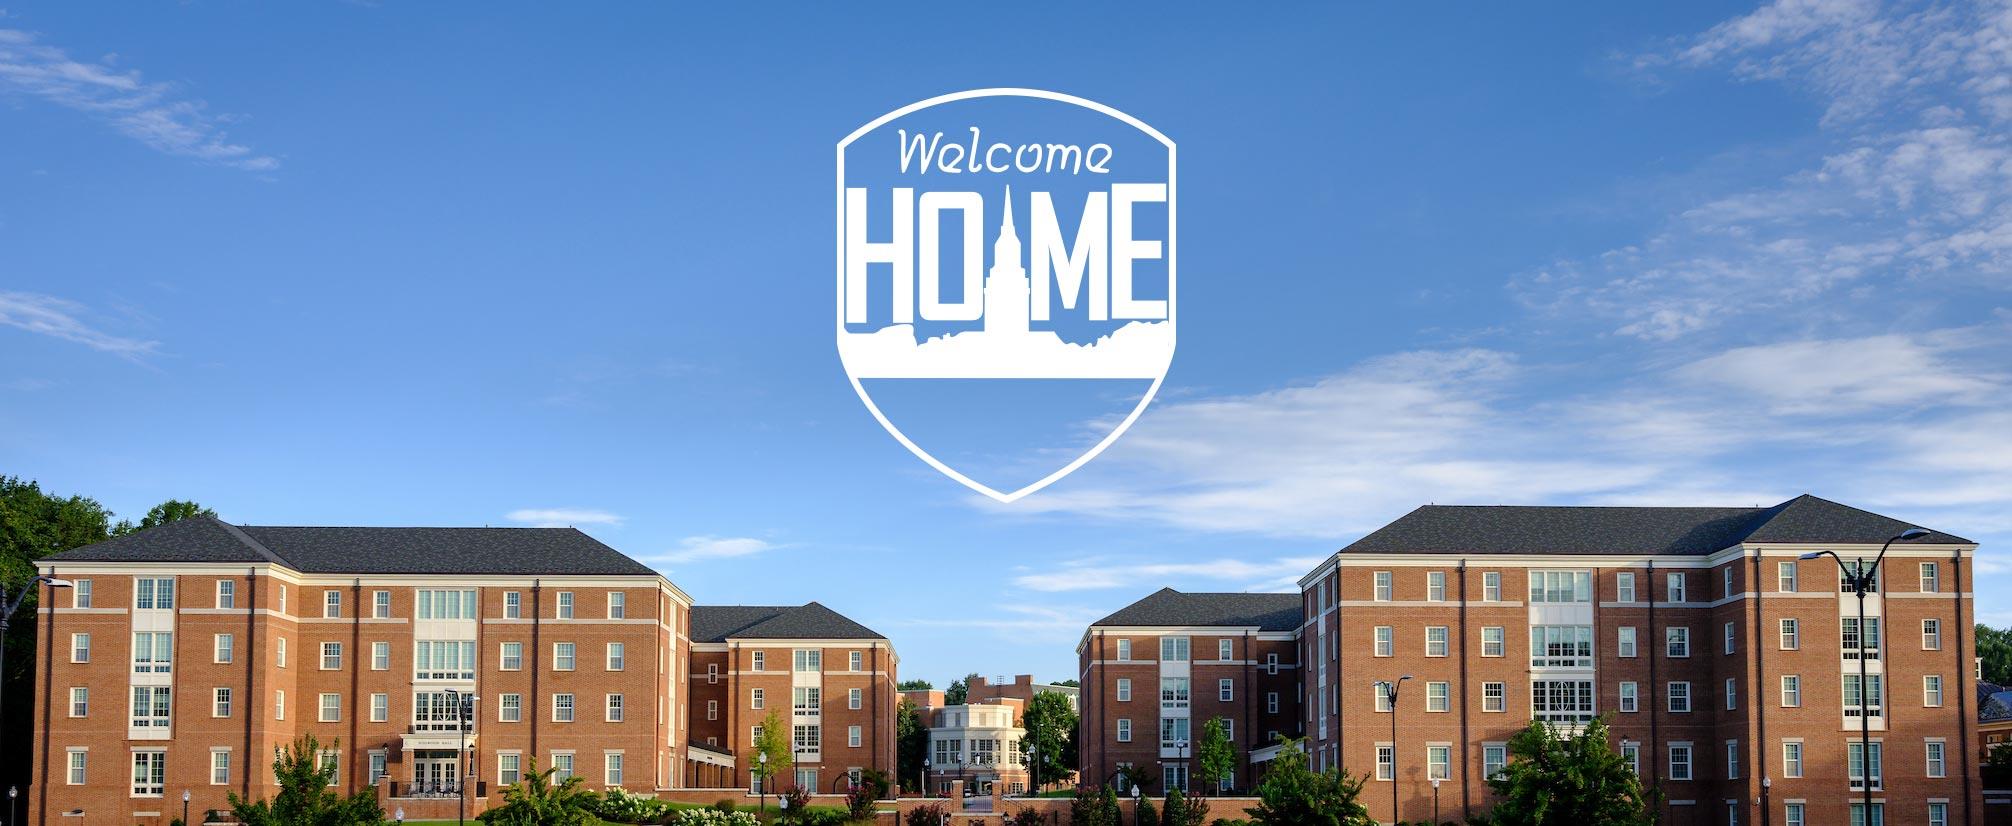 Welcome Home above Dogwood and Magnolia Halls